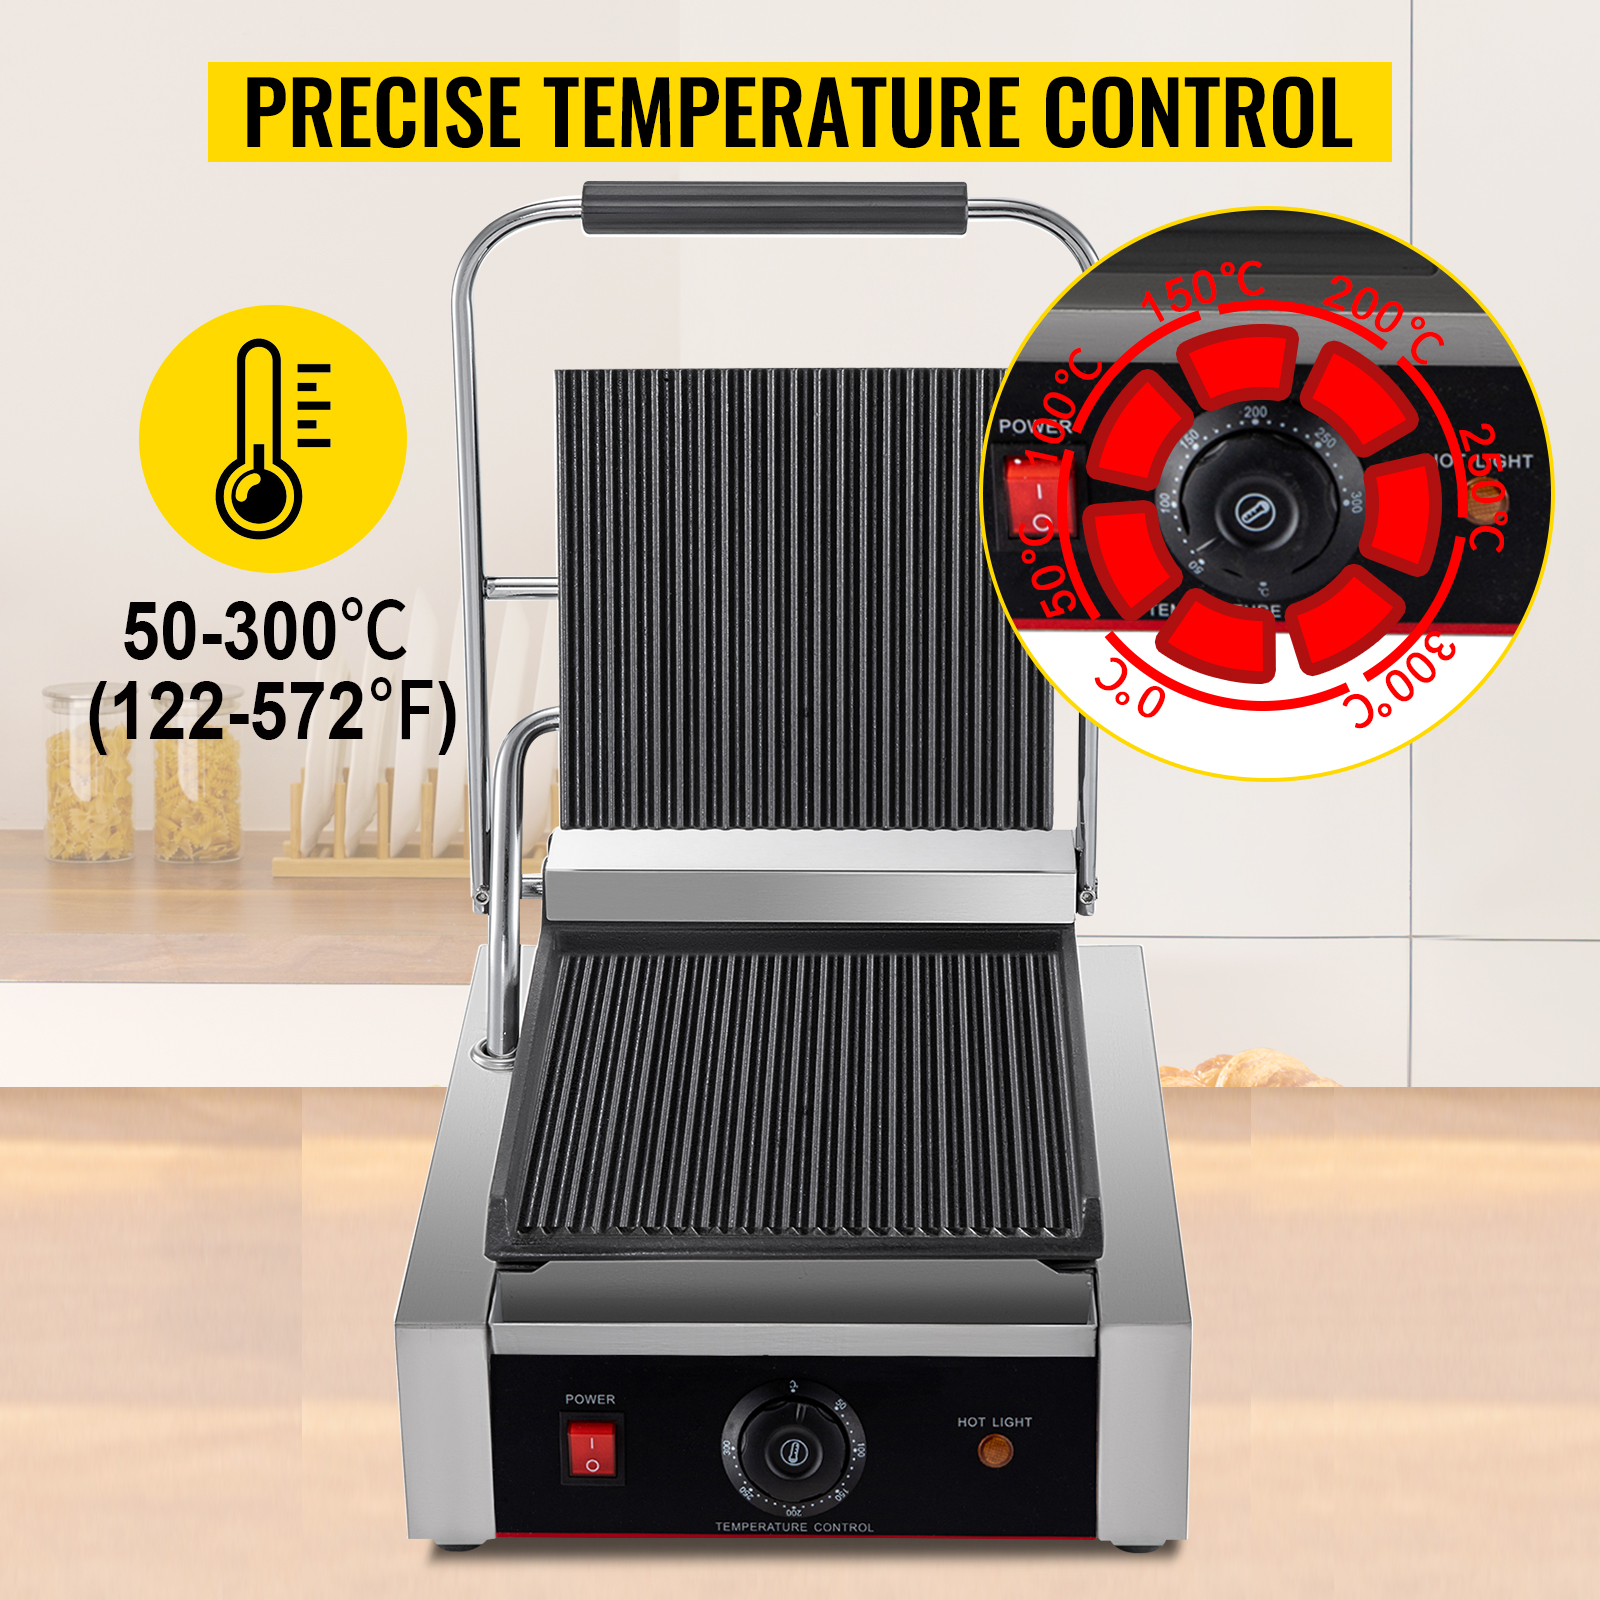 VEVOR Commercial Sandwich Panini Press Grill, 2X1800W Double Flat Plates  Electric Stainless Steel Sandwich Maker, Temperature Control 122°F-572°F  Non Stick Surface for Hamburgers Steaks Bacons.